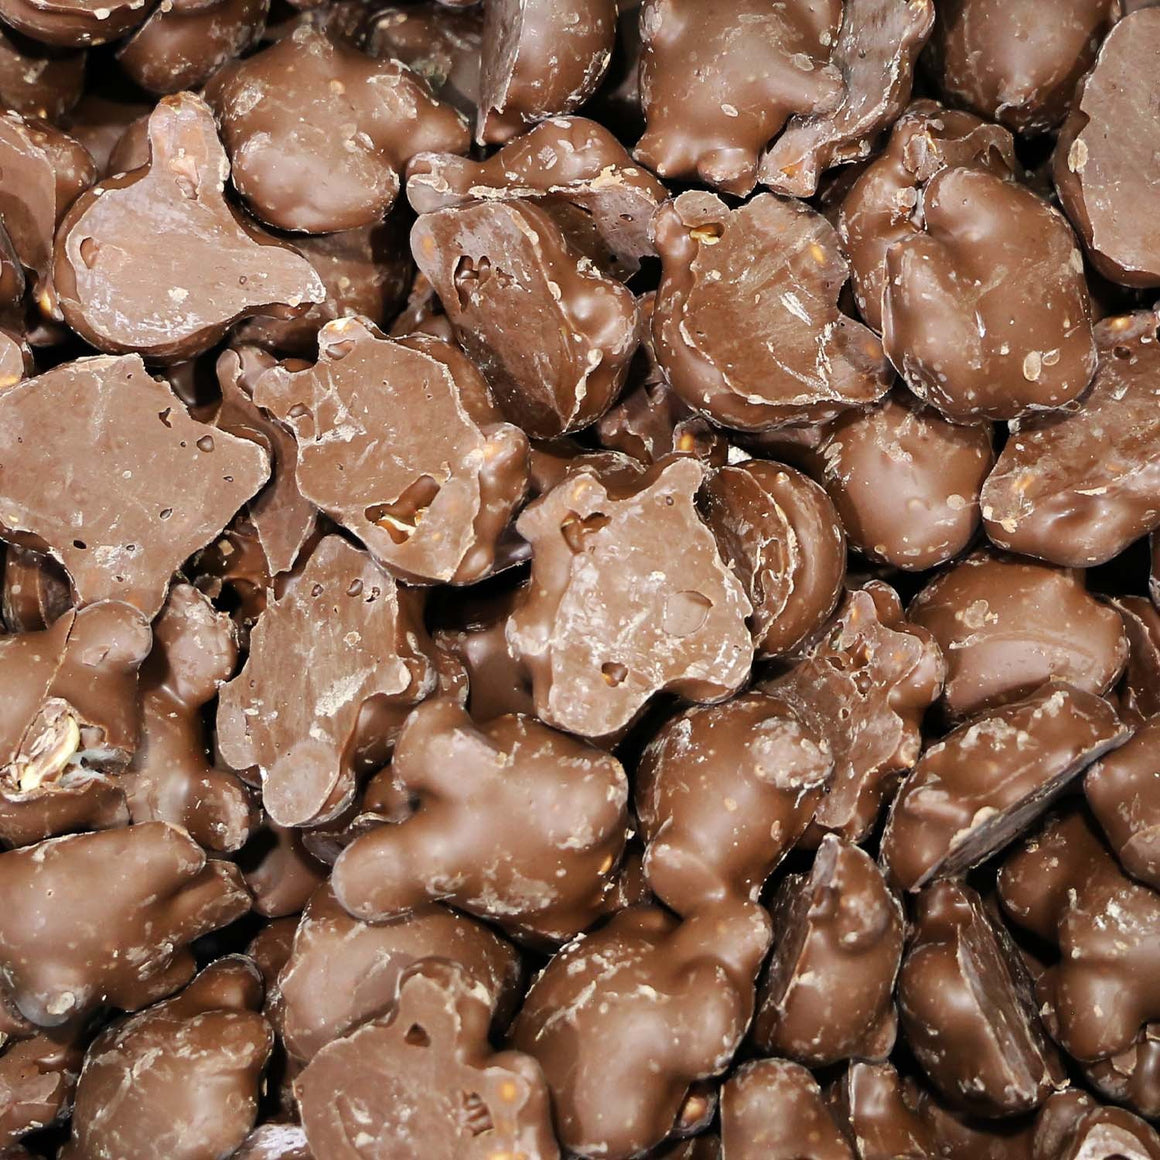 All City Candy Milk Chocolate Vanilla Nut Clusters Bulk Unwrapped Zachary For fresh candy and great service, visit www.allcitycandy.com